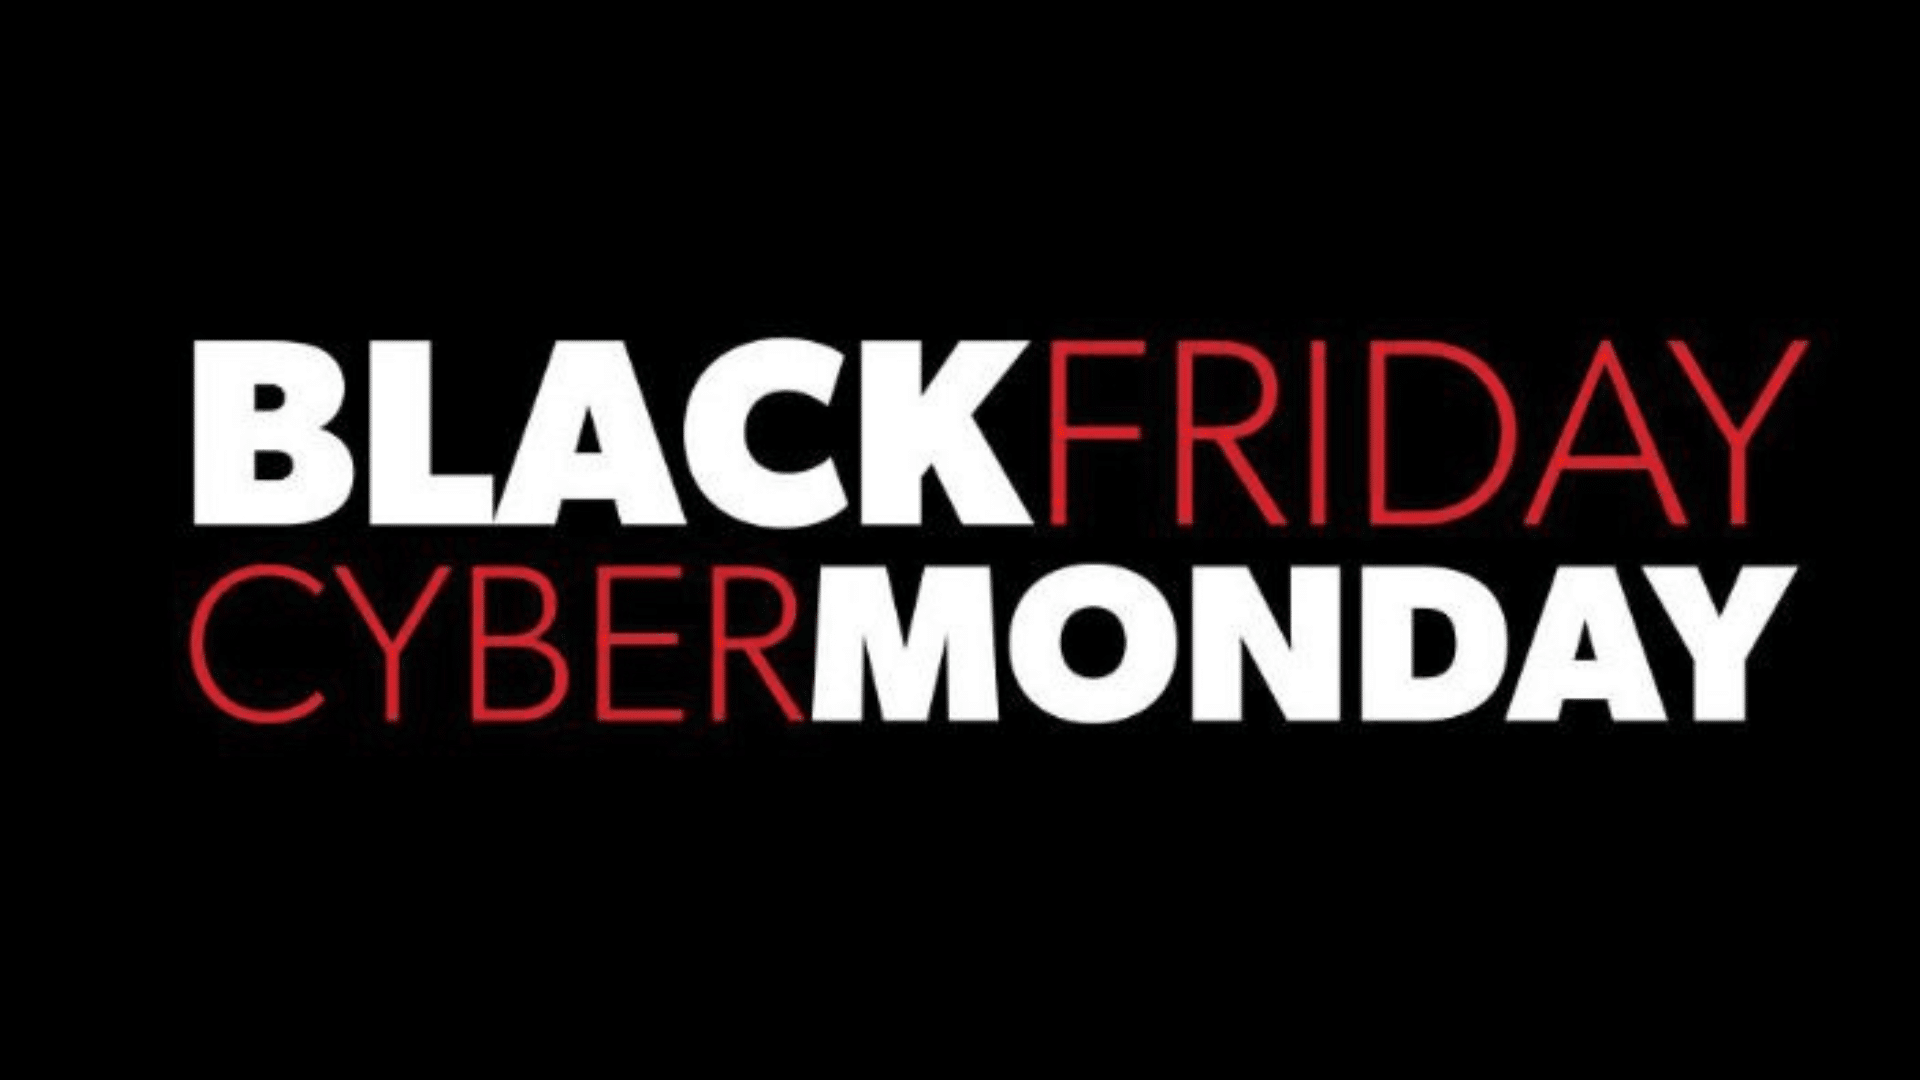 4 tips to prepare for Black Friday and Cyber Monday